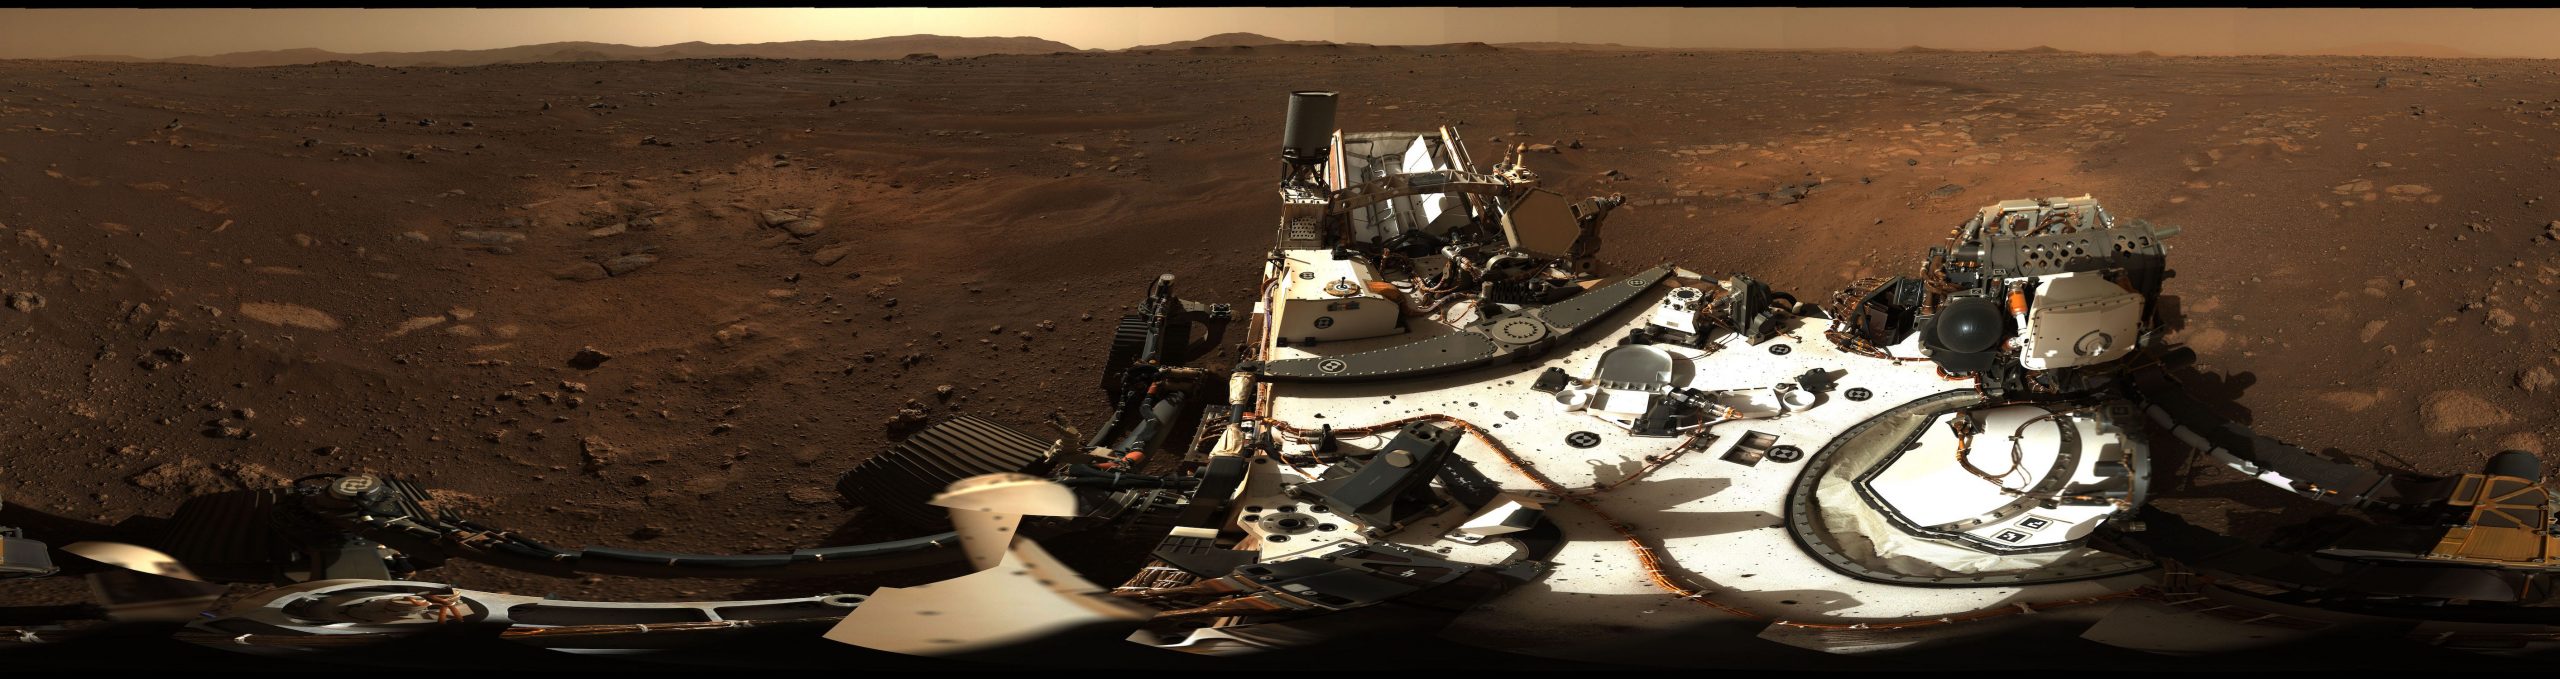 perseverance mars rover panorama high definition 360 degrees smaller size